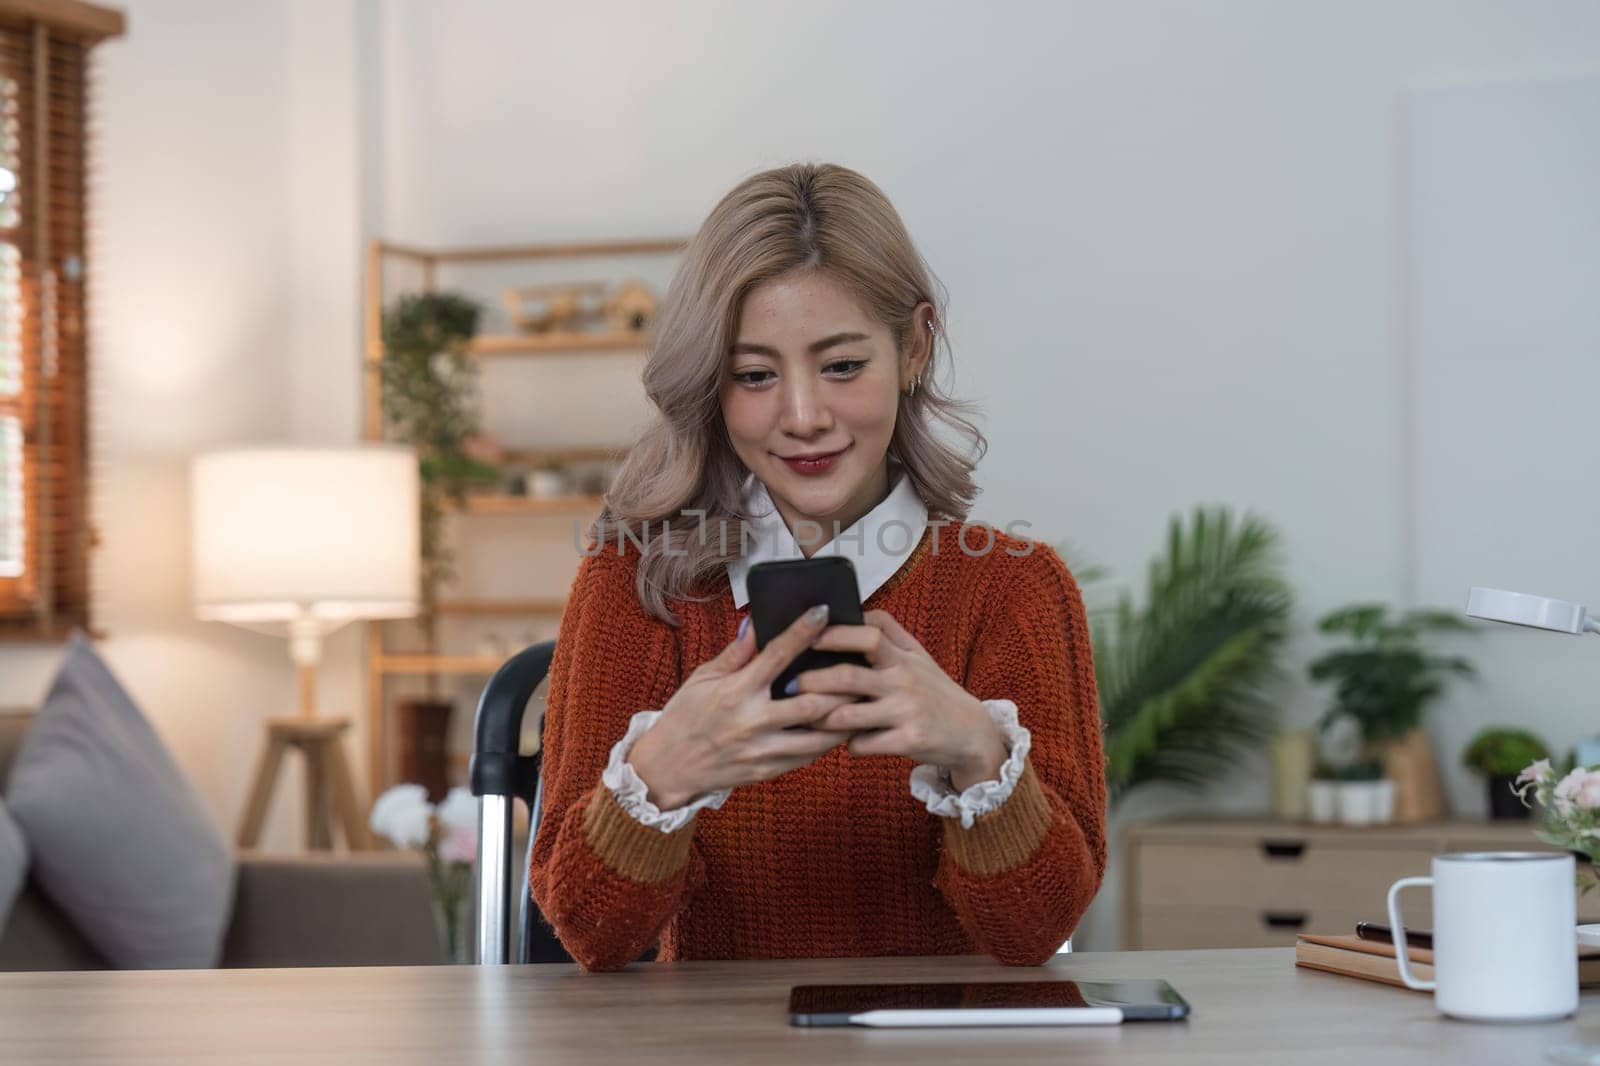 Cute asian woman looking at the smartphone in her hands. Female using phone while sitting down on the desk of her.